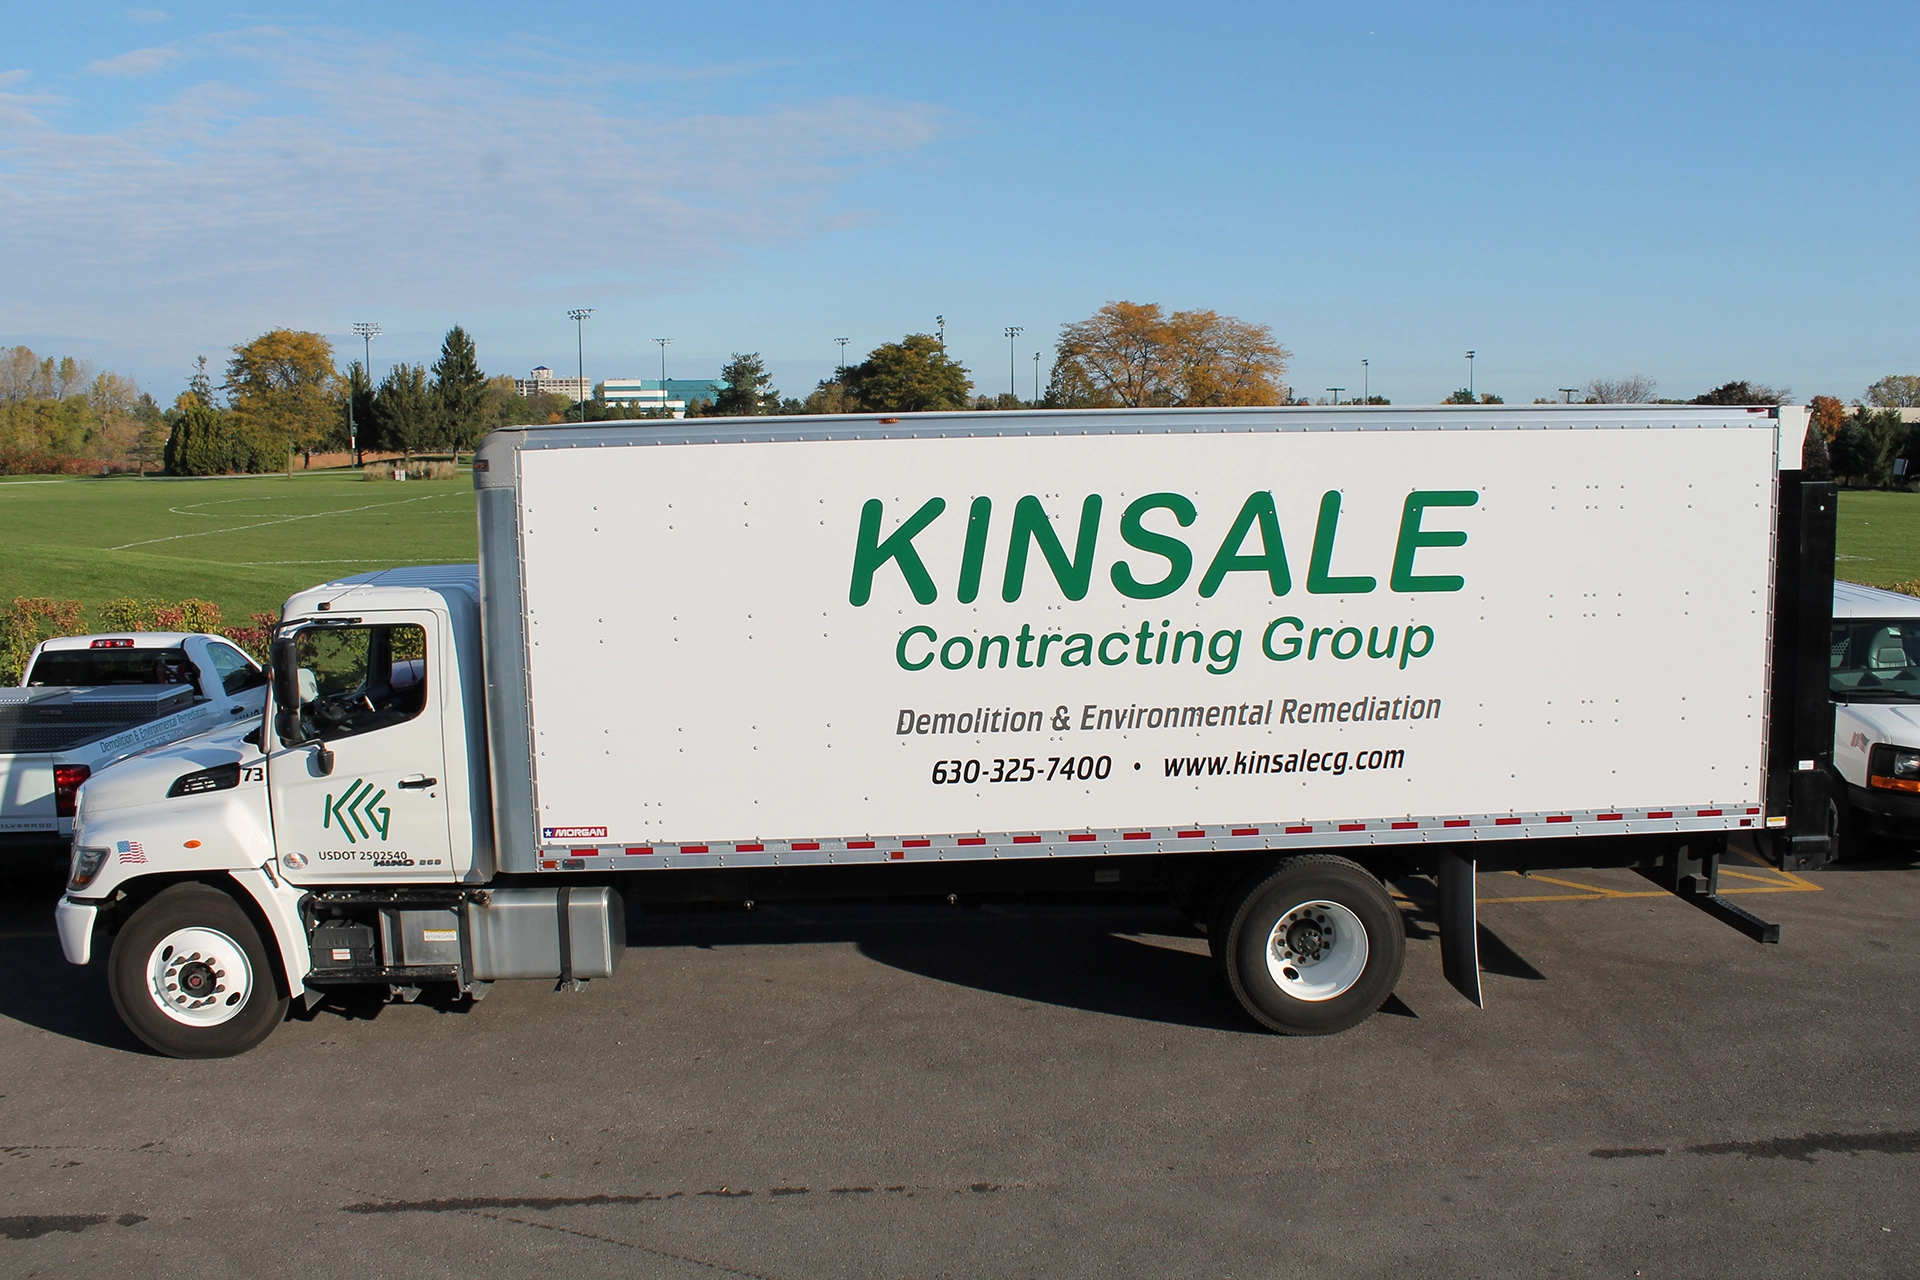 Kinsale Contracting Group Team